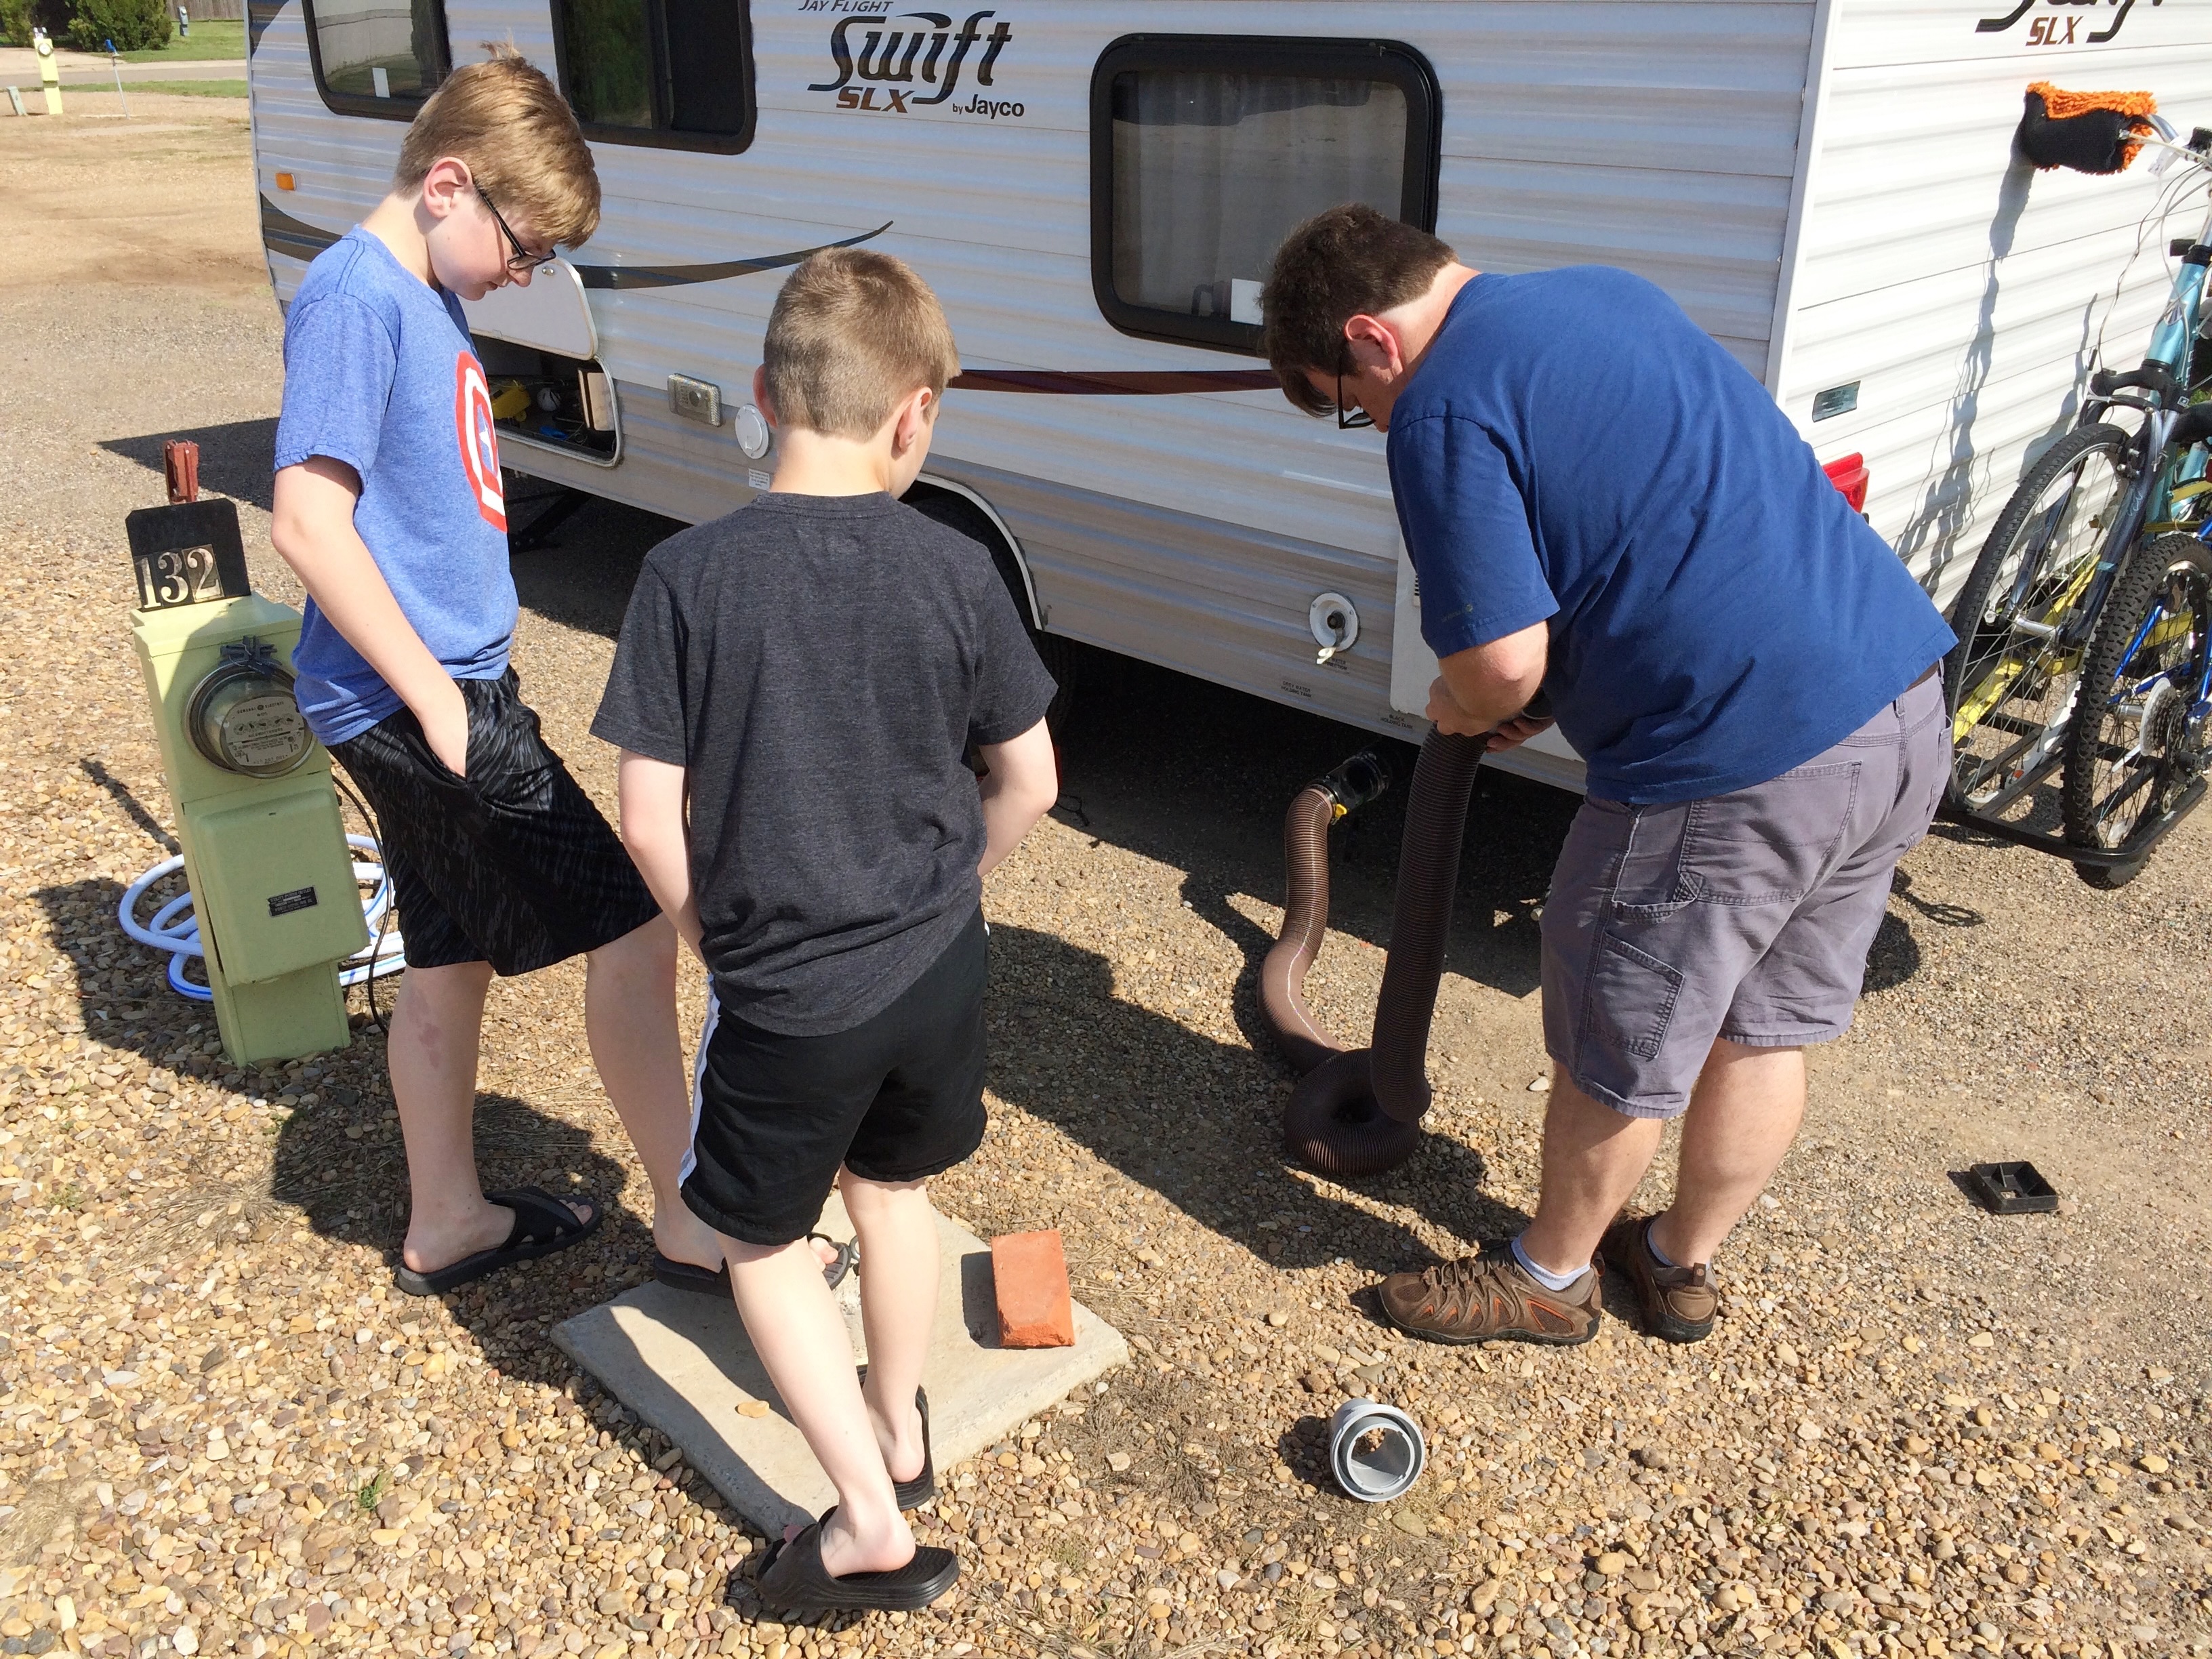 Man and two boys setting up campsite.